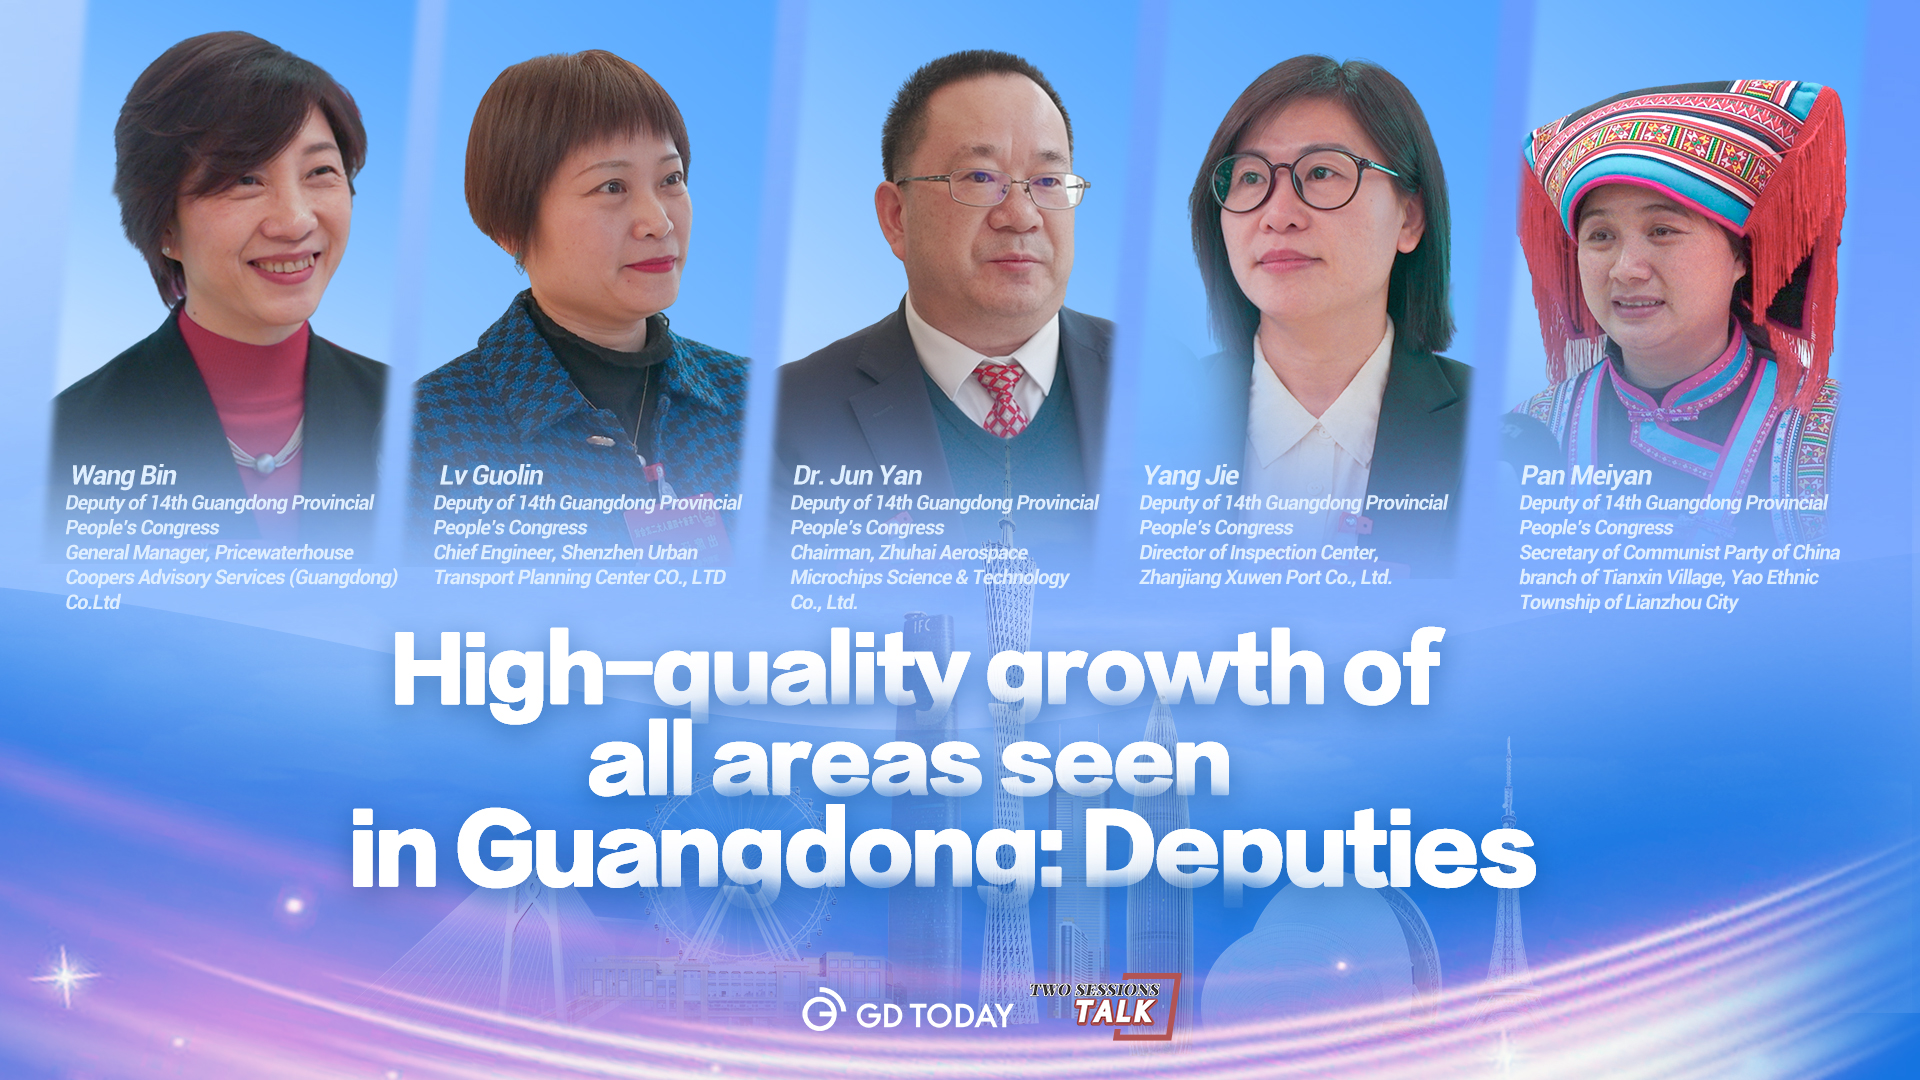 High-quality growth of all areas seen in Guangdong: Deputies